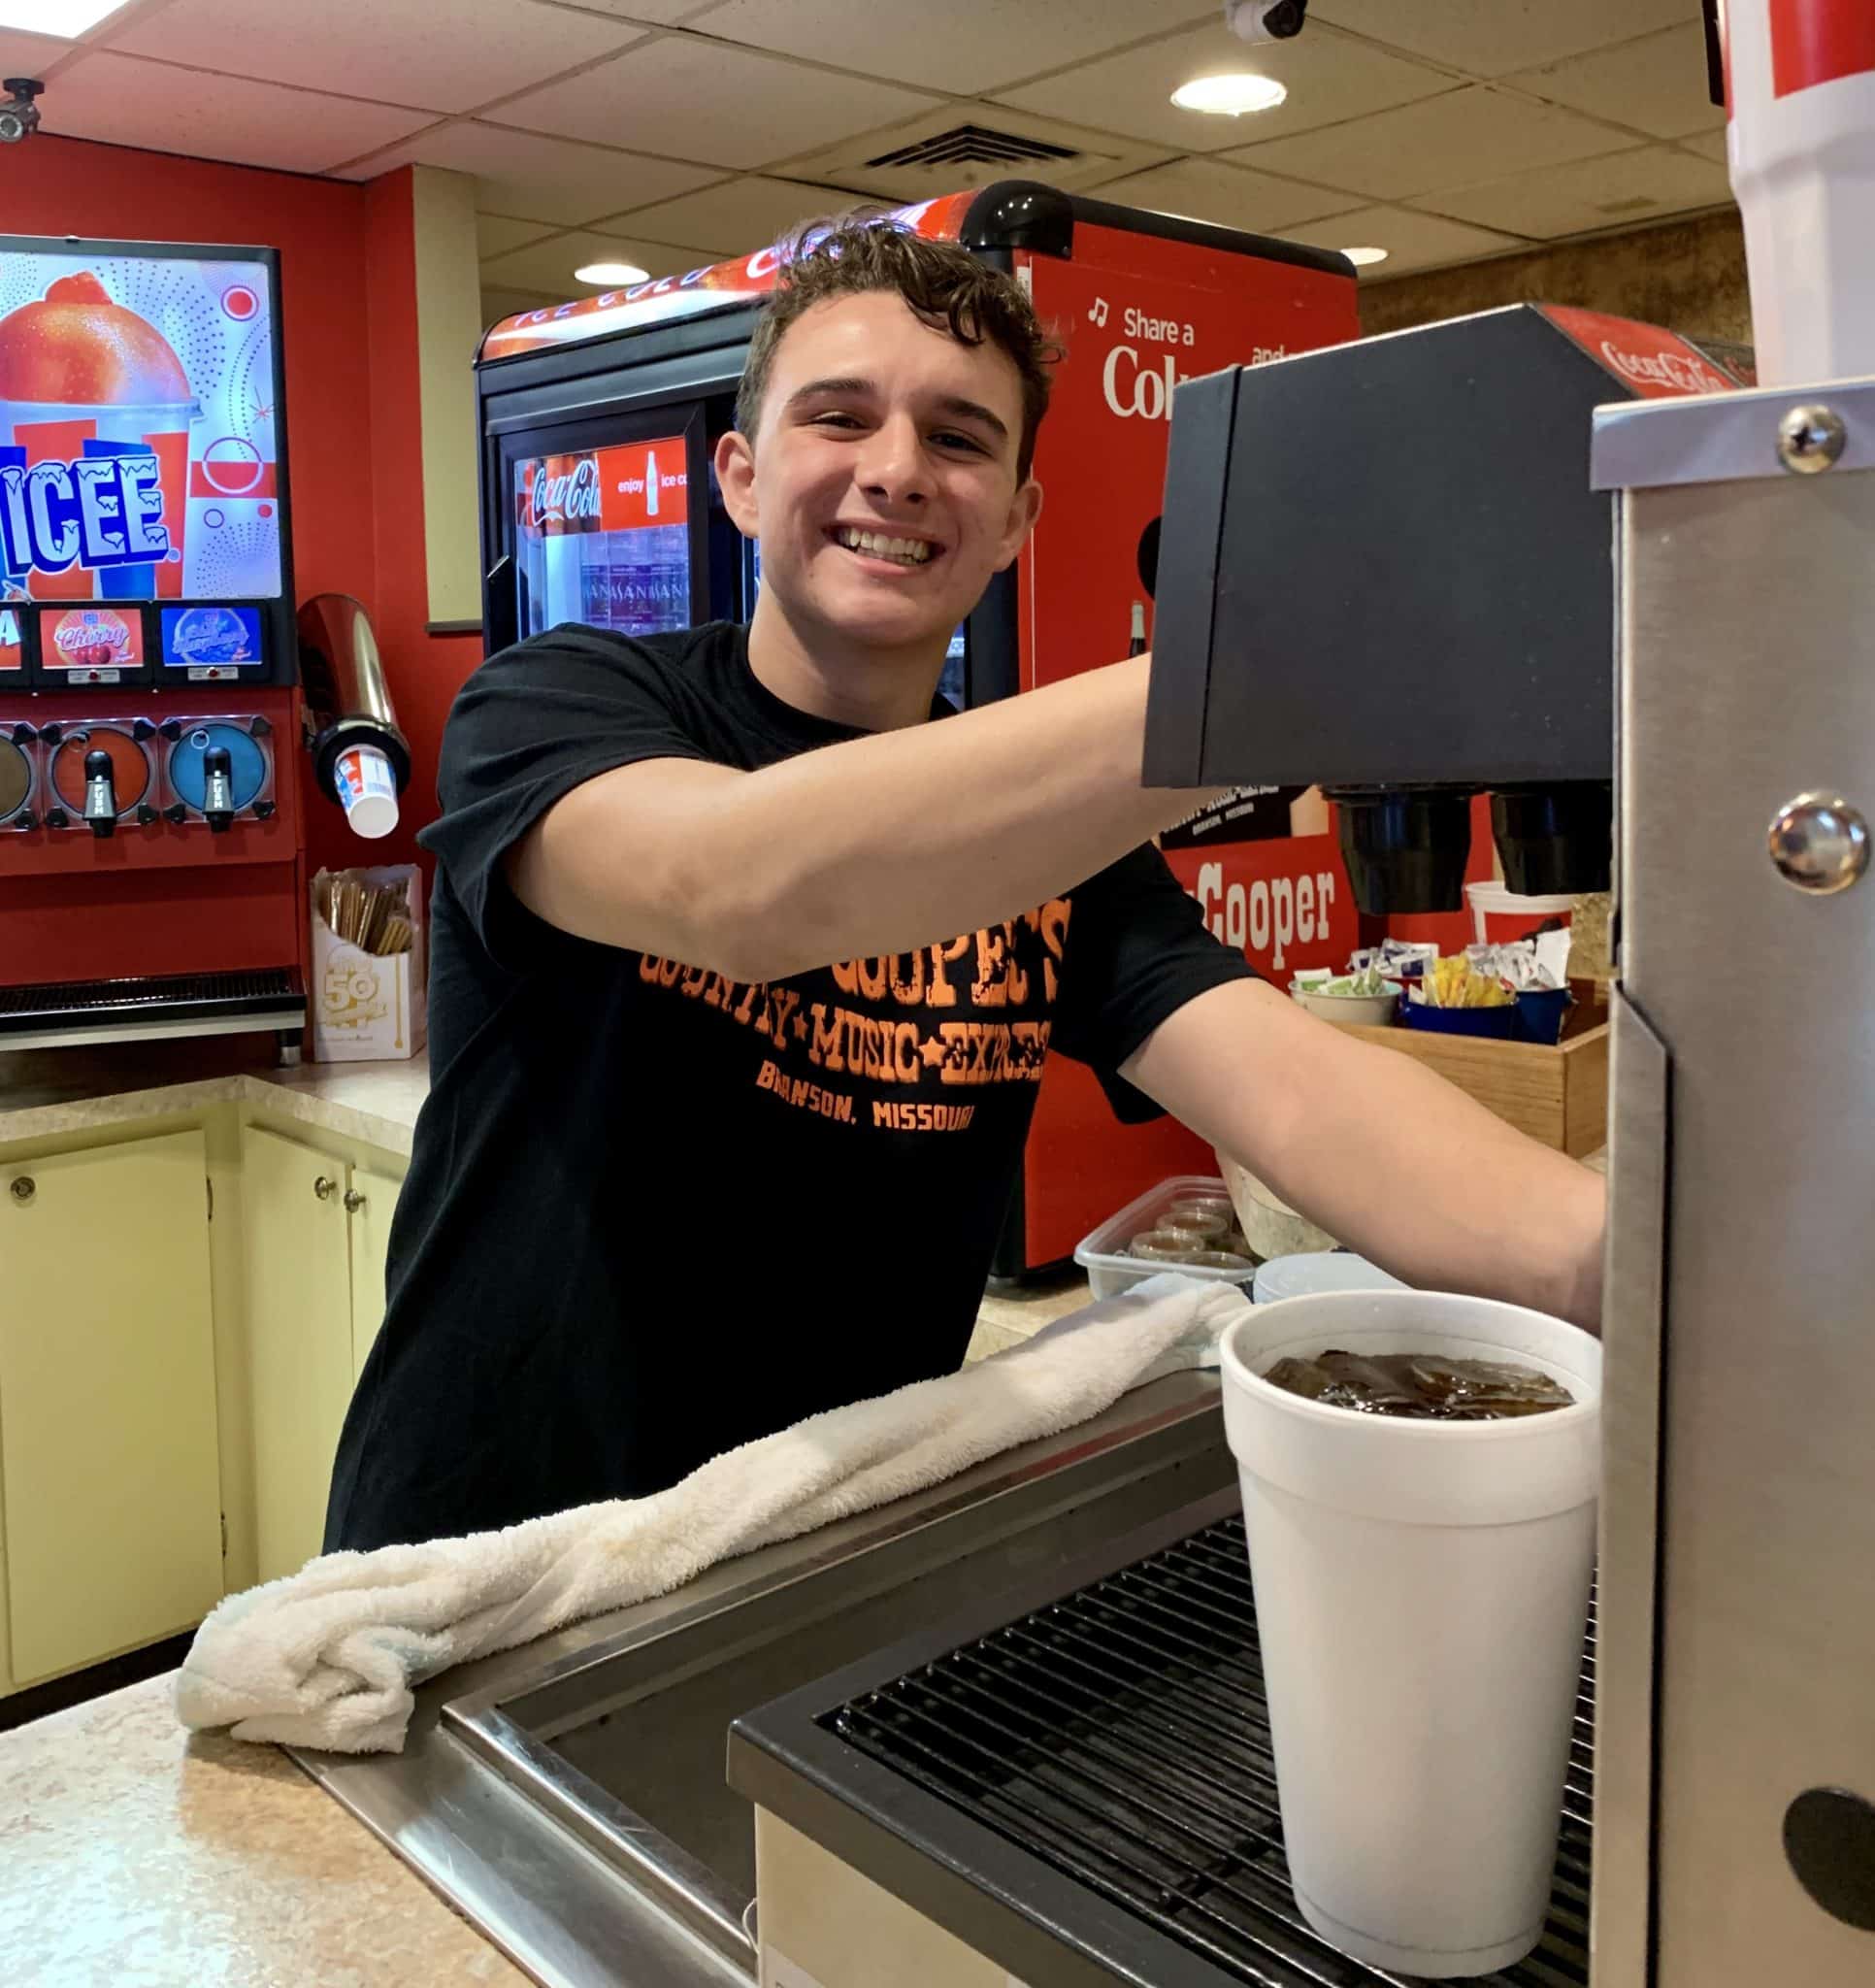 Colt Cooper serving drinks and popcorn at Clay Cooper Country Express